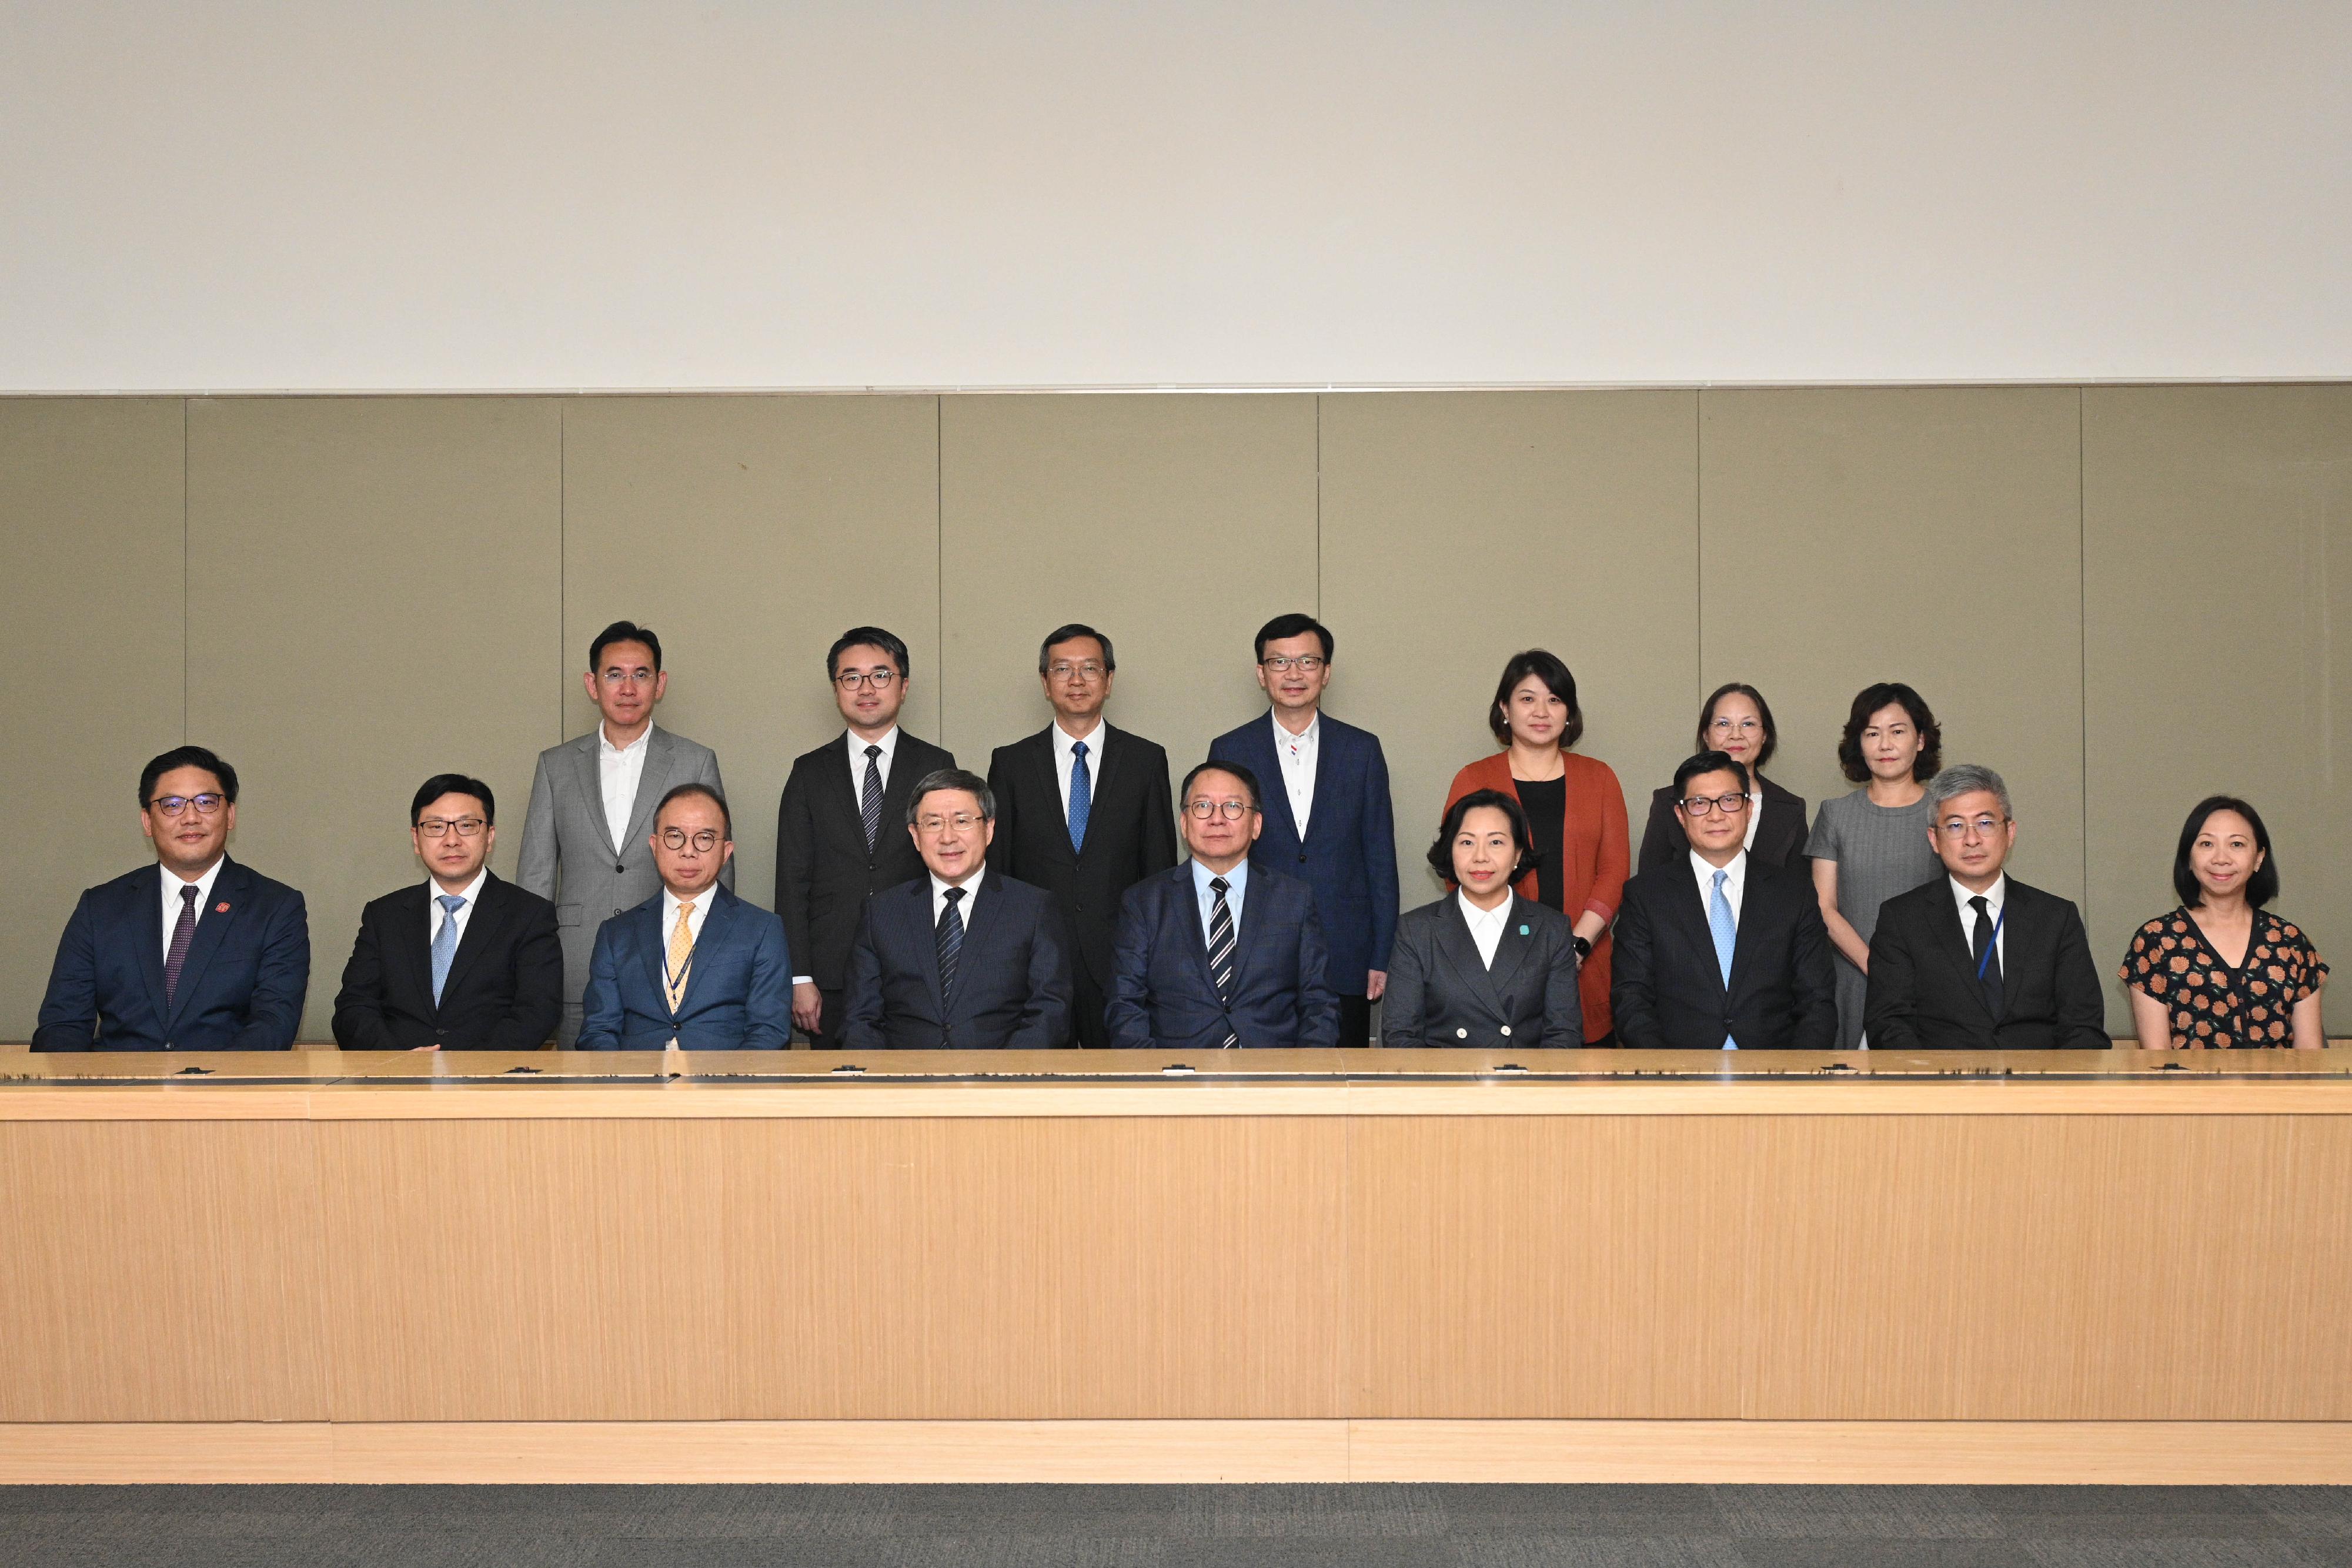 The Steering Committee on District Governance, chaired by the Chief Secretary for Administration, Mr Chan Kwok-ki, held its first meeting this afternoon (July 12). Photo shows Mr Chan (front row, centre), together with the Deputy Chief Secretary for Administration, Mr Cheuk Wing-hing (front row, fourth left), and the Secretary for Home and Youth Affairs, Miss Alice Mak (front row, fourth right), with other committee members before the meeting.